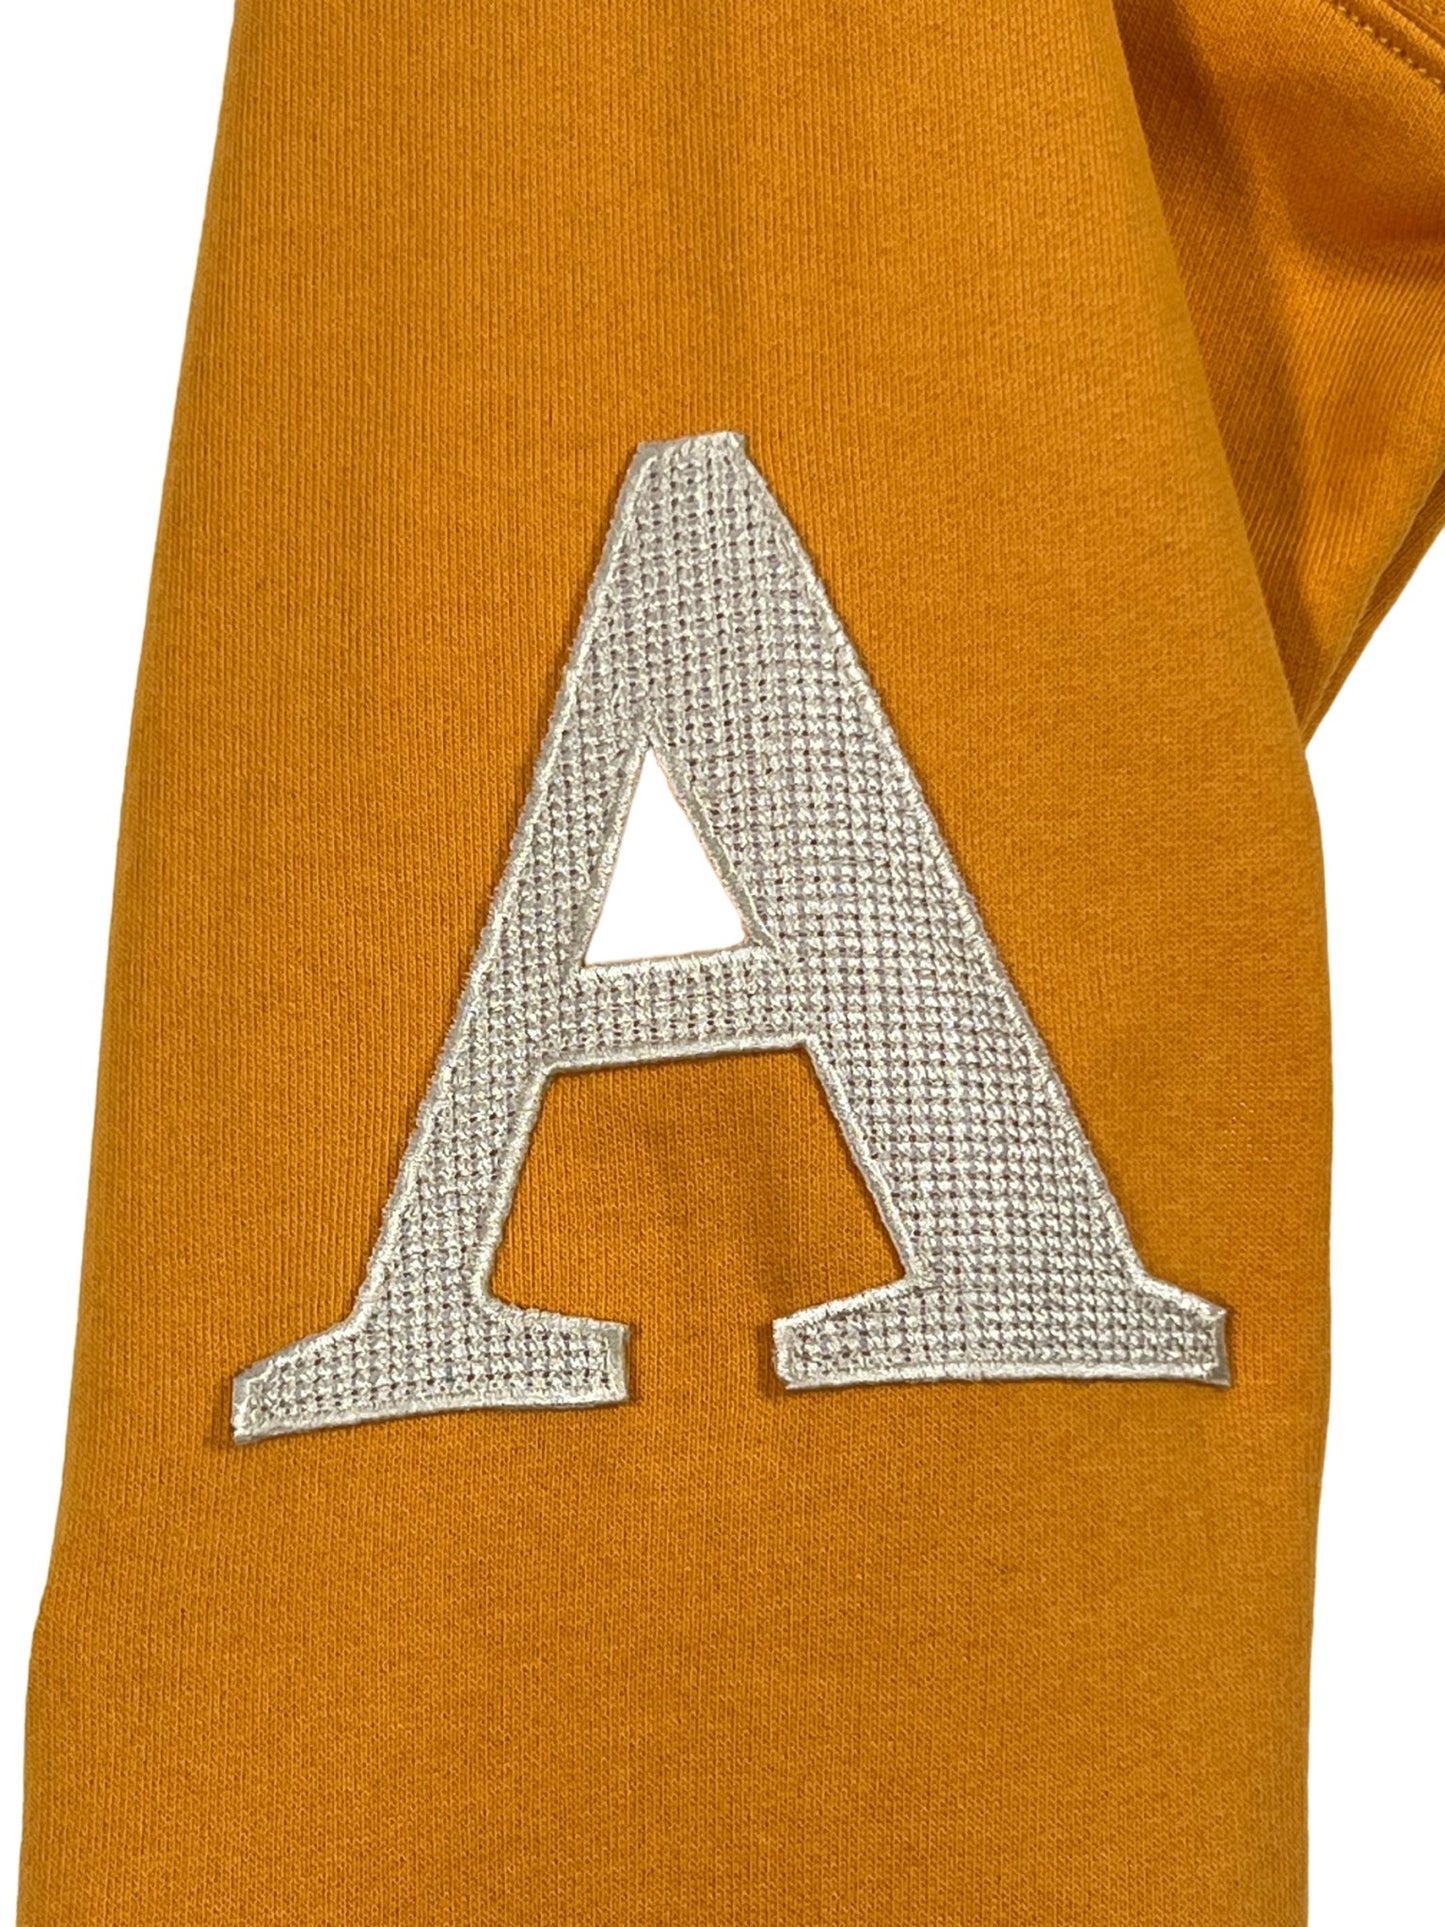 AL AIN ocre yellow hoodie with a silver letter 'a' embroidered.